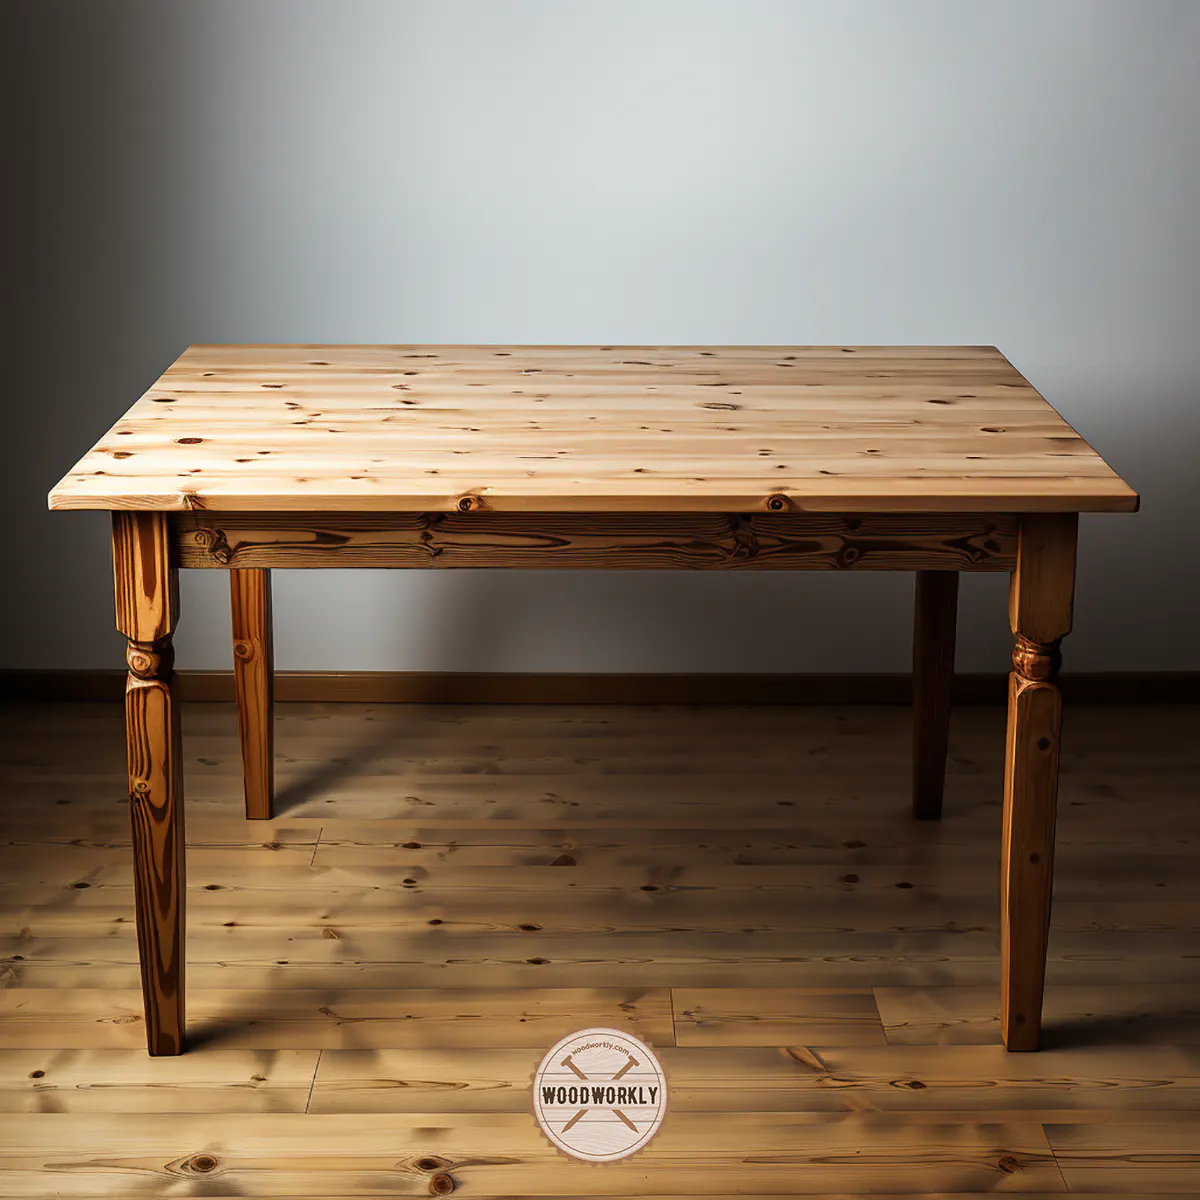 Pine wood dining table finished with tung oil